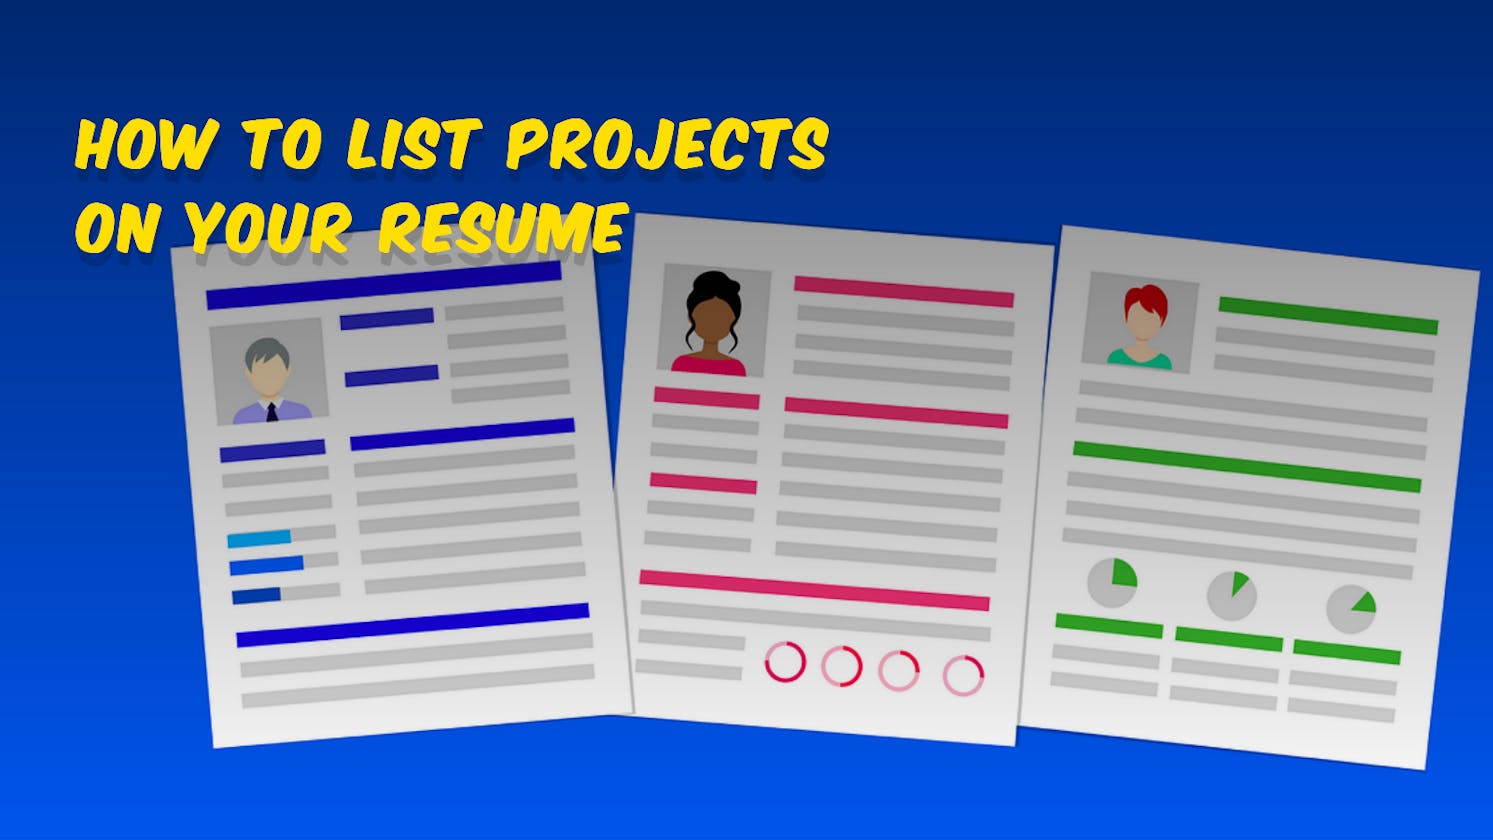 How to List Projects on Your Resume: Tips and Examples